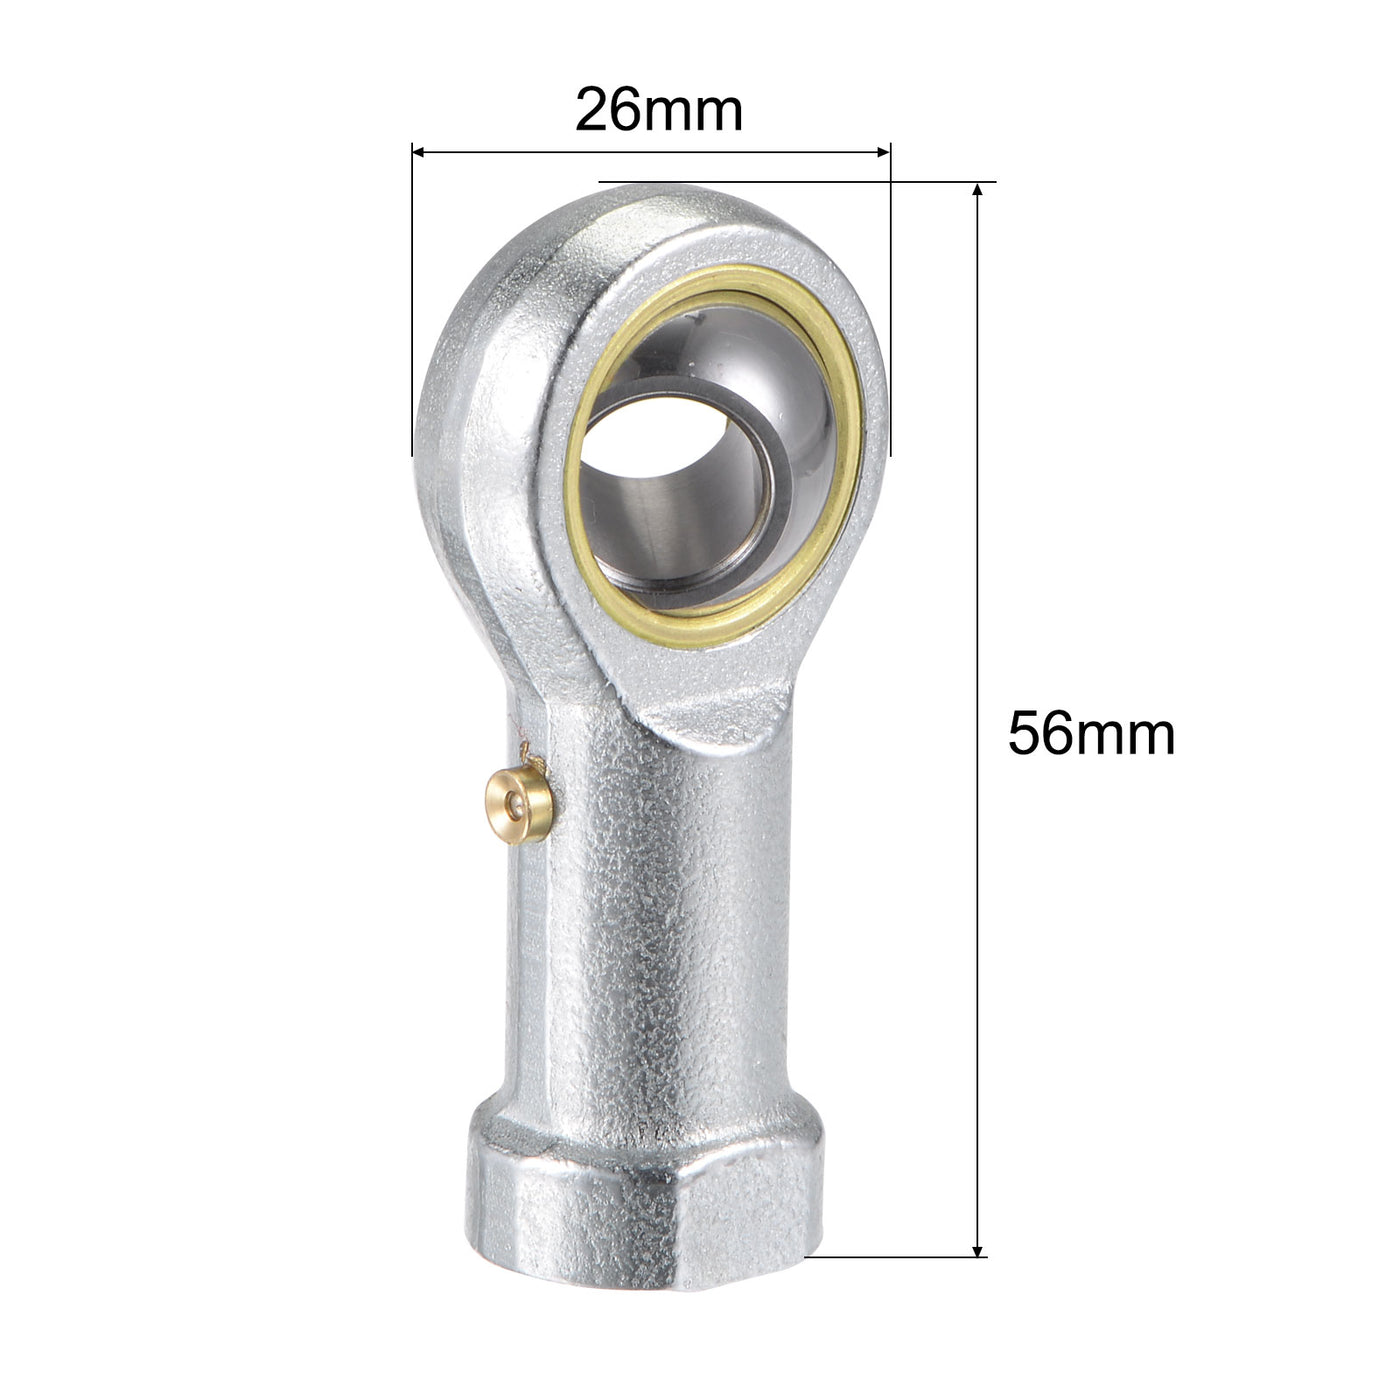 uxcell Uxcell PHS10 Rod End Bearing 10mm Bore Self-lubricated M10x1.5 Right Hand Female Thread